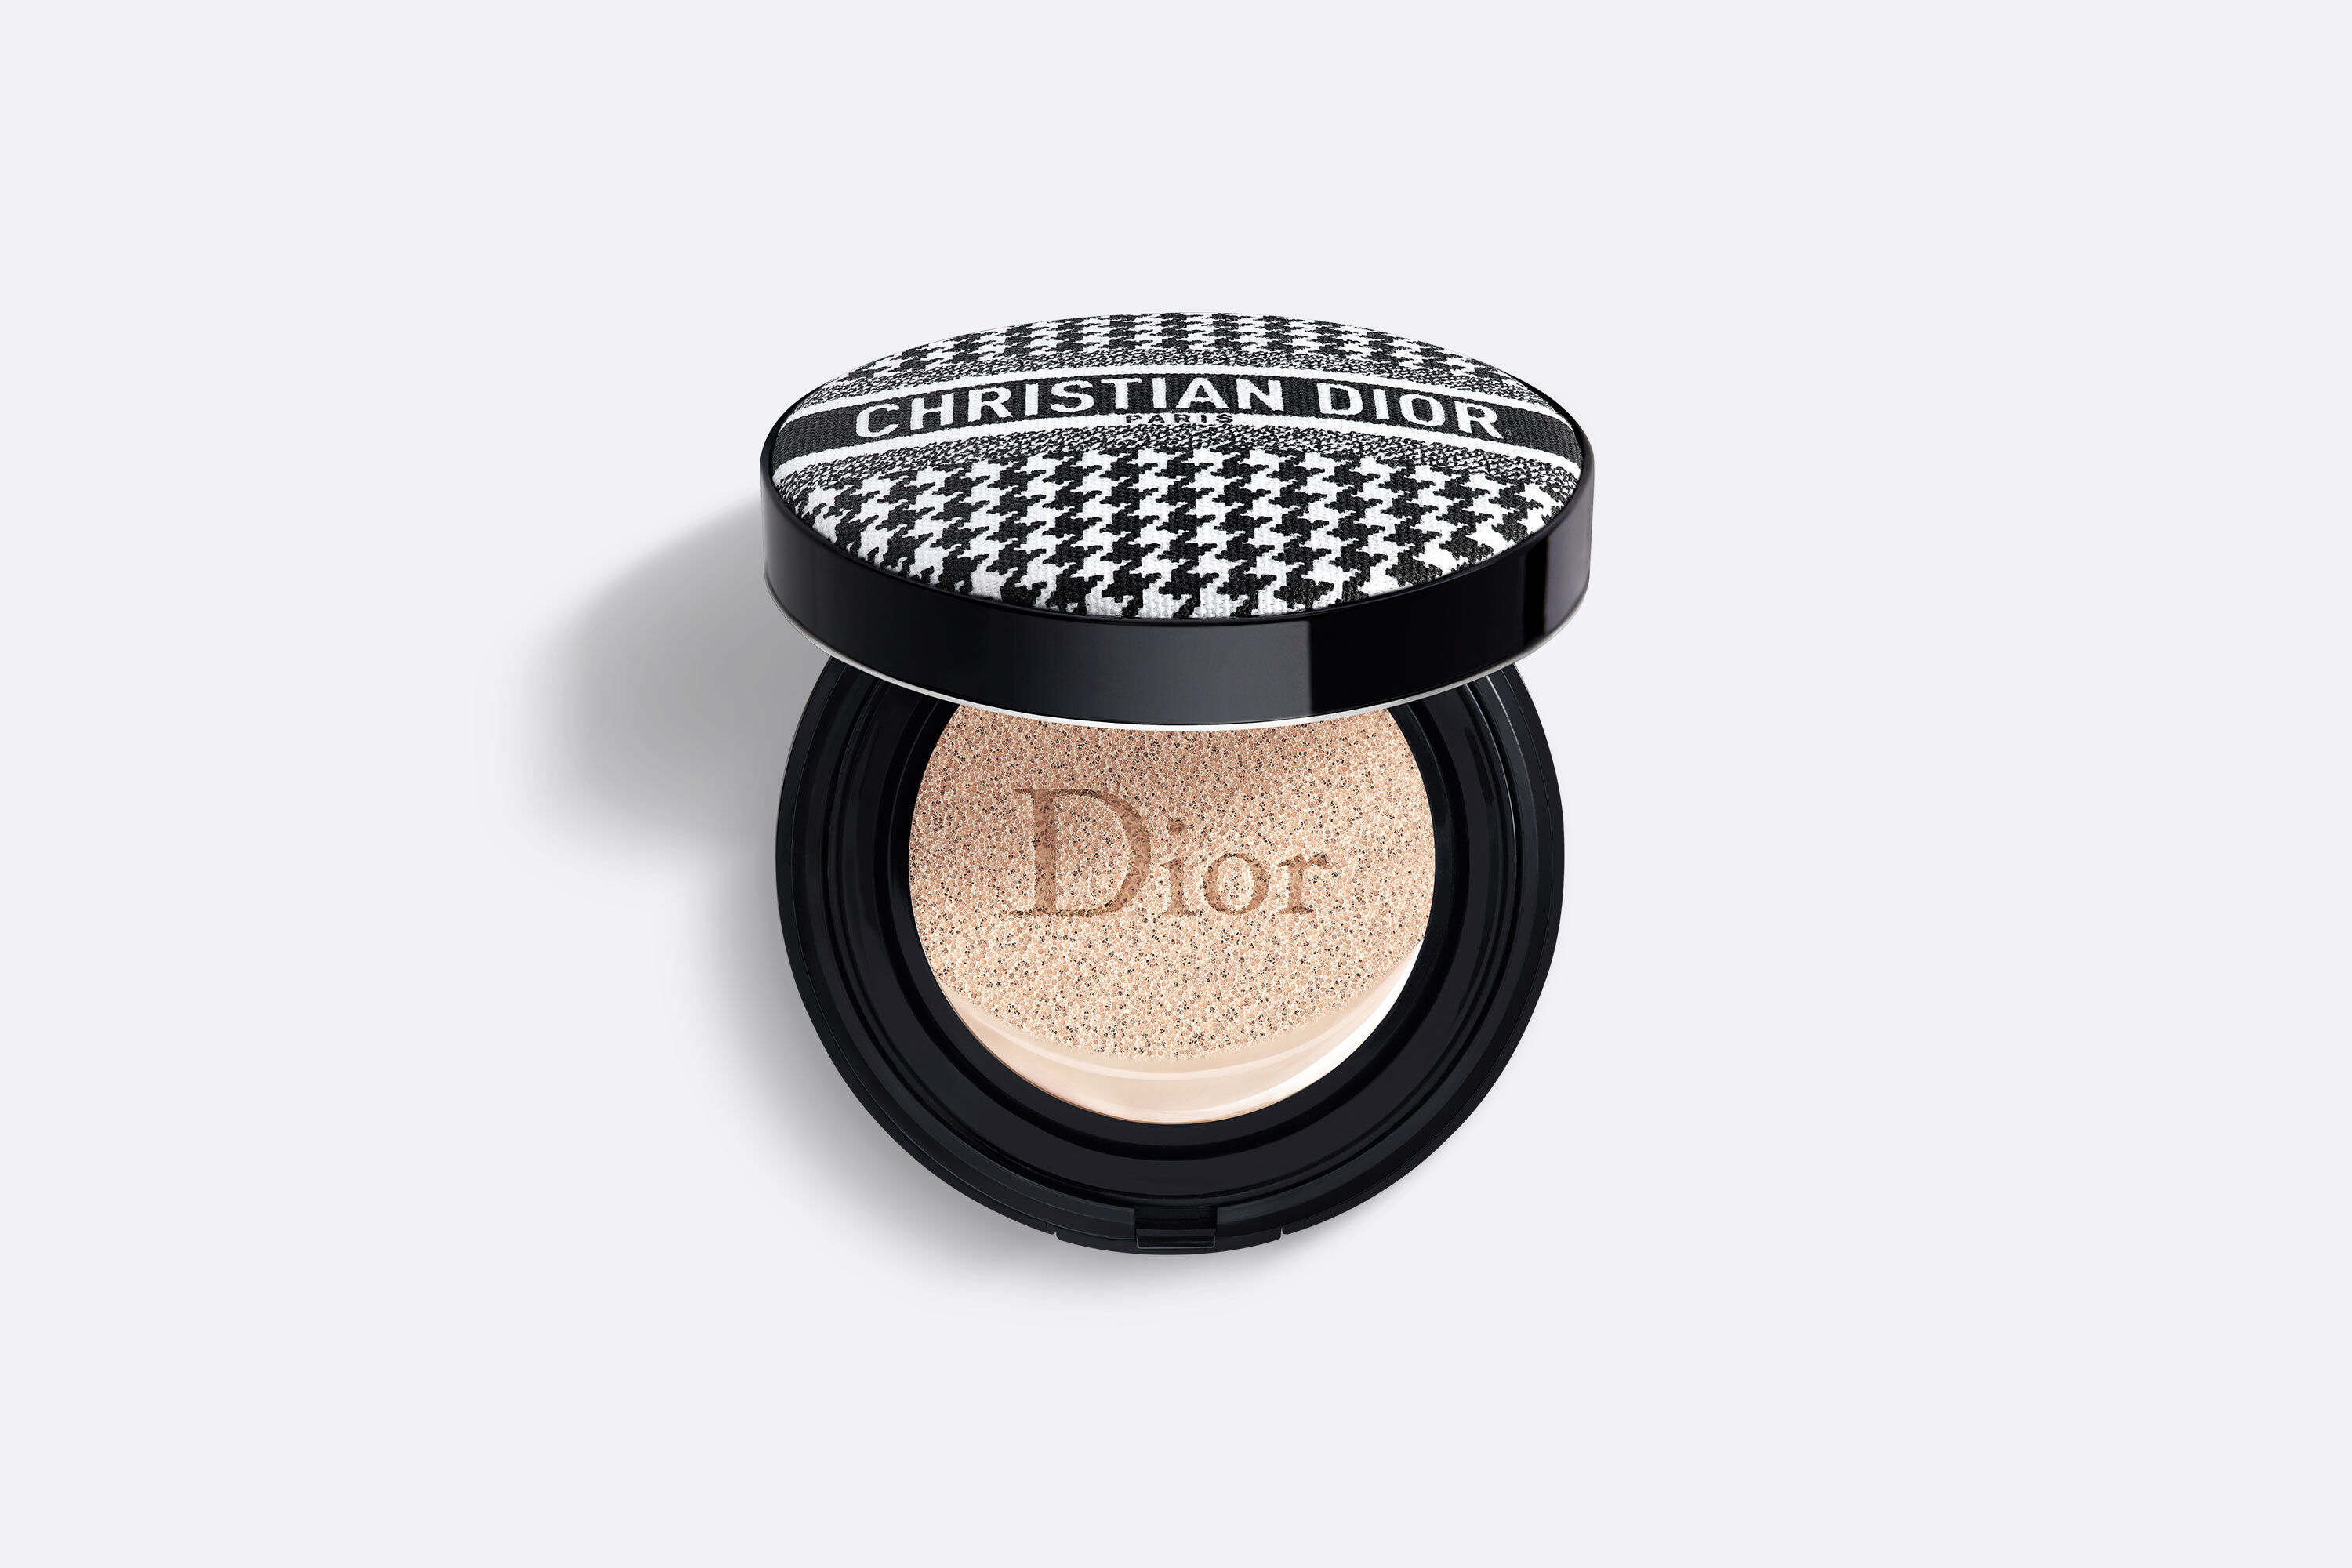 Ruqaiya Khan DIOR Forever Natural Velvet Matte Compact Foundation in 3N  Review and Swatches